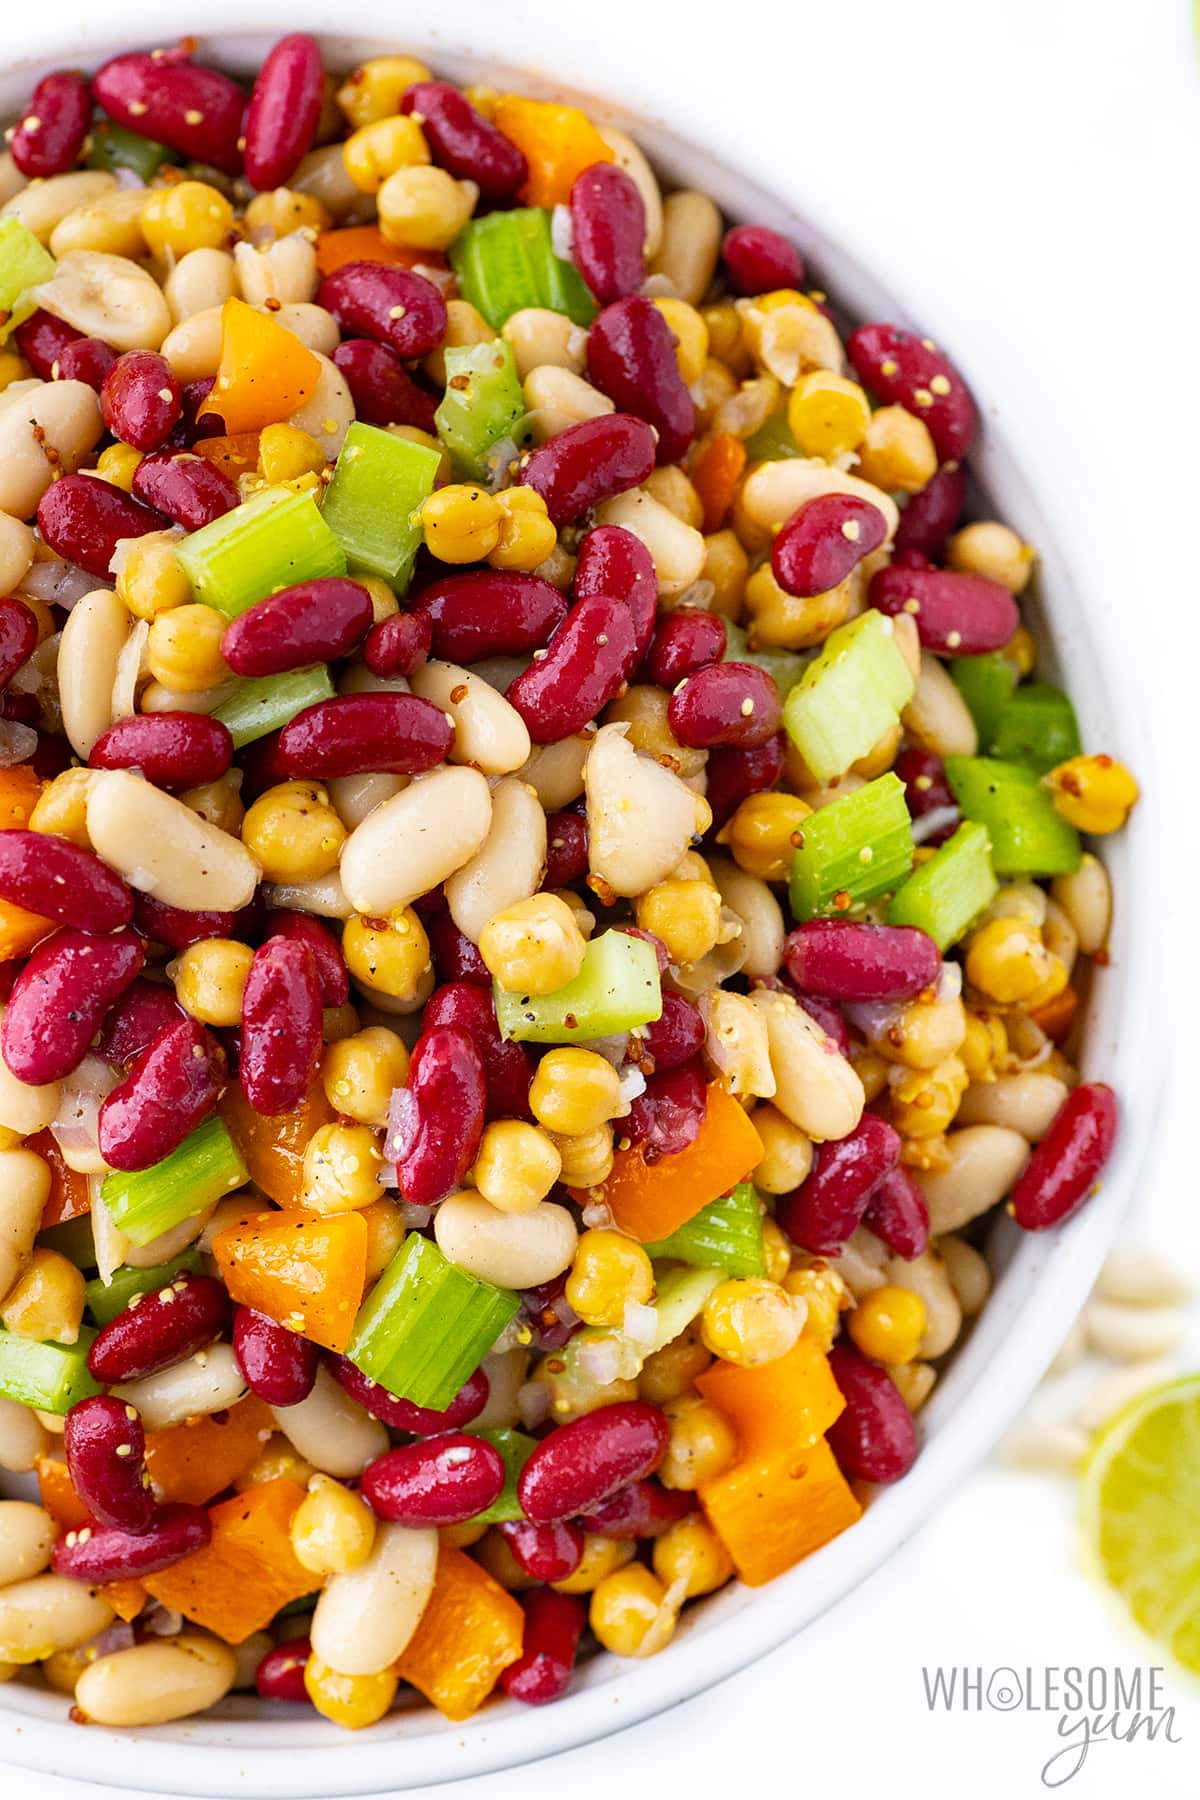 Bean salad recipe dished into a bowl.